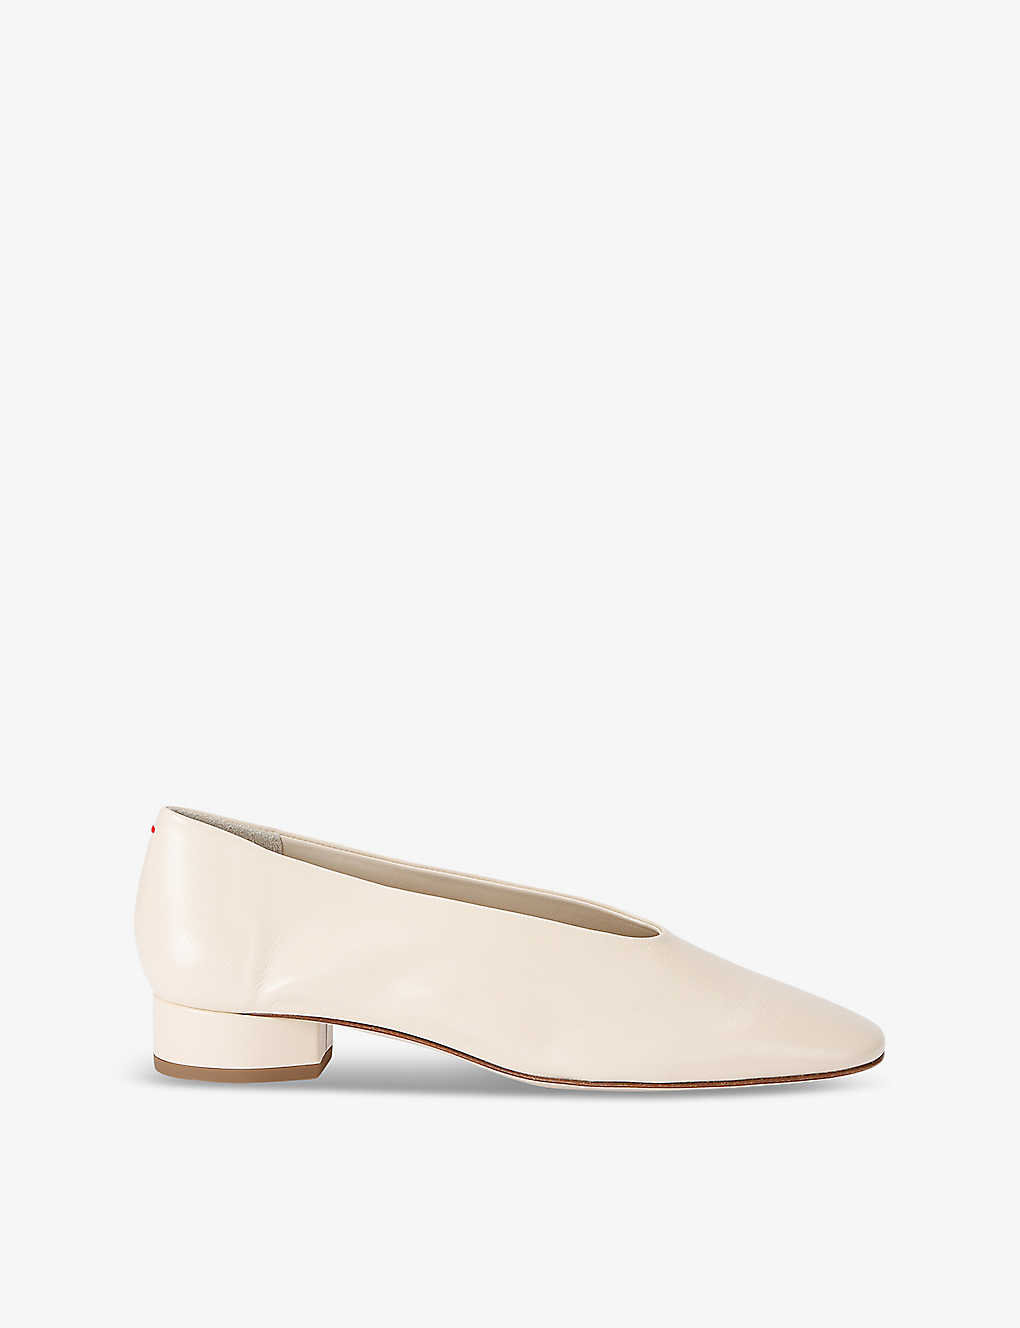 Shop Aeyde Women's Cream Delia Pointed-toe Leather Heeled Courts